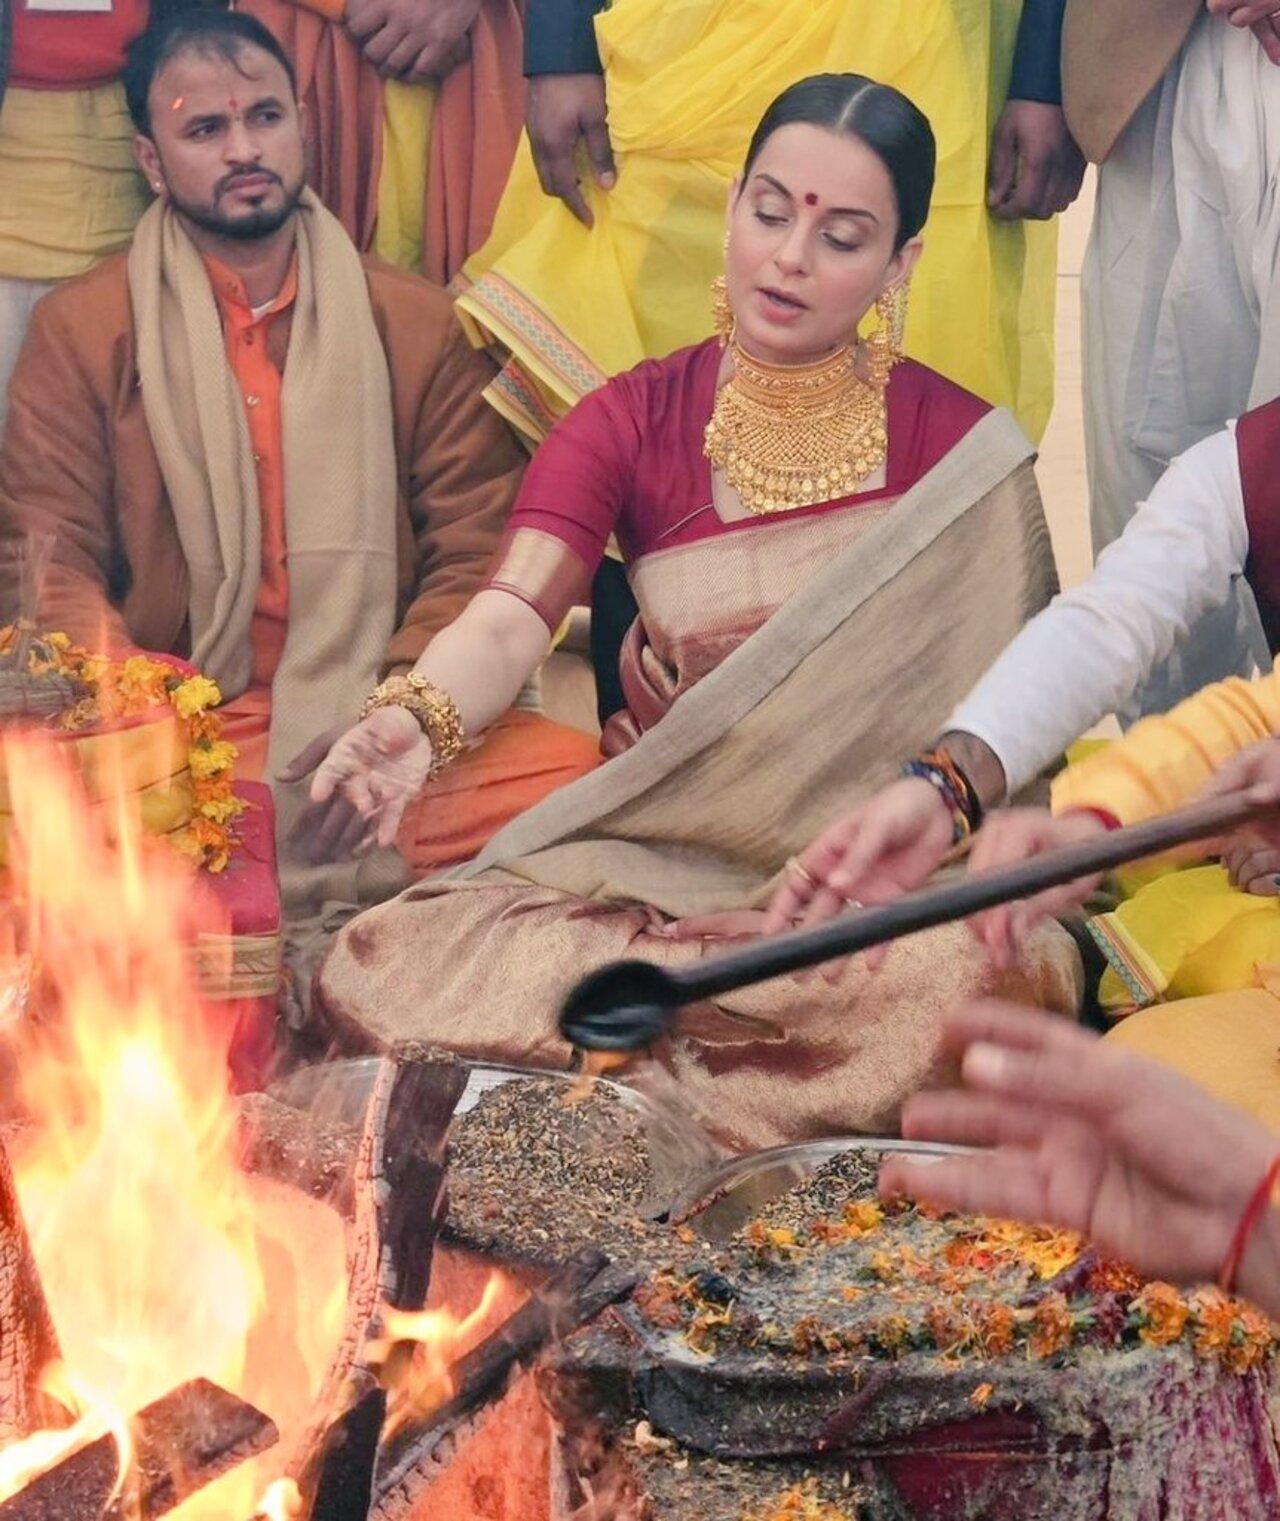 The actress was seen performing yagya during her visit to Ayodhya. She was seen dressed in a silk saree with heavy gold jewellery 